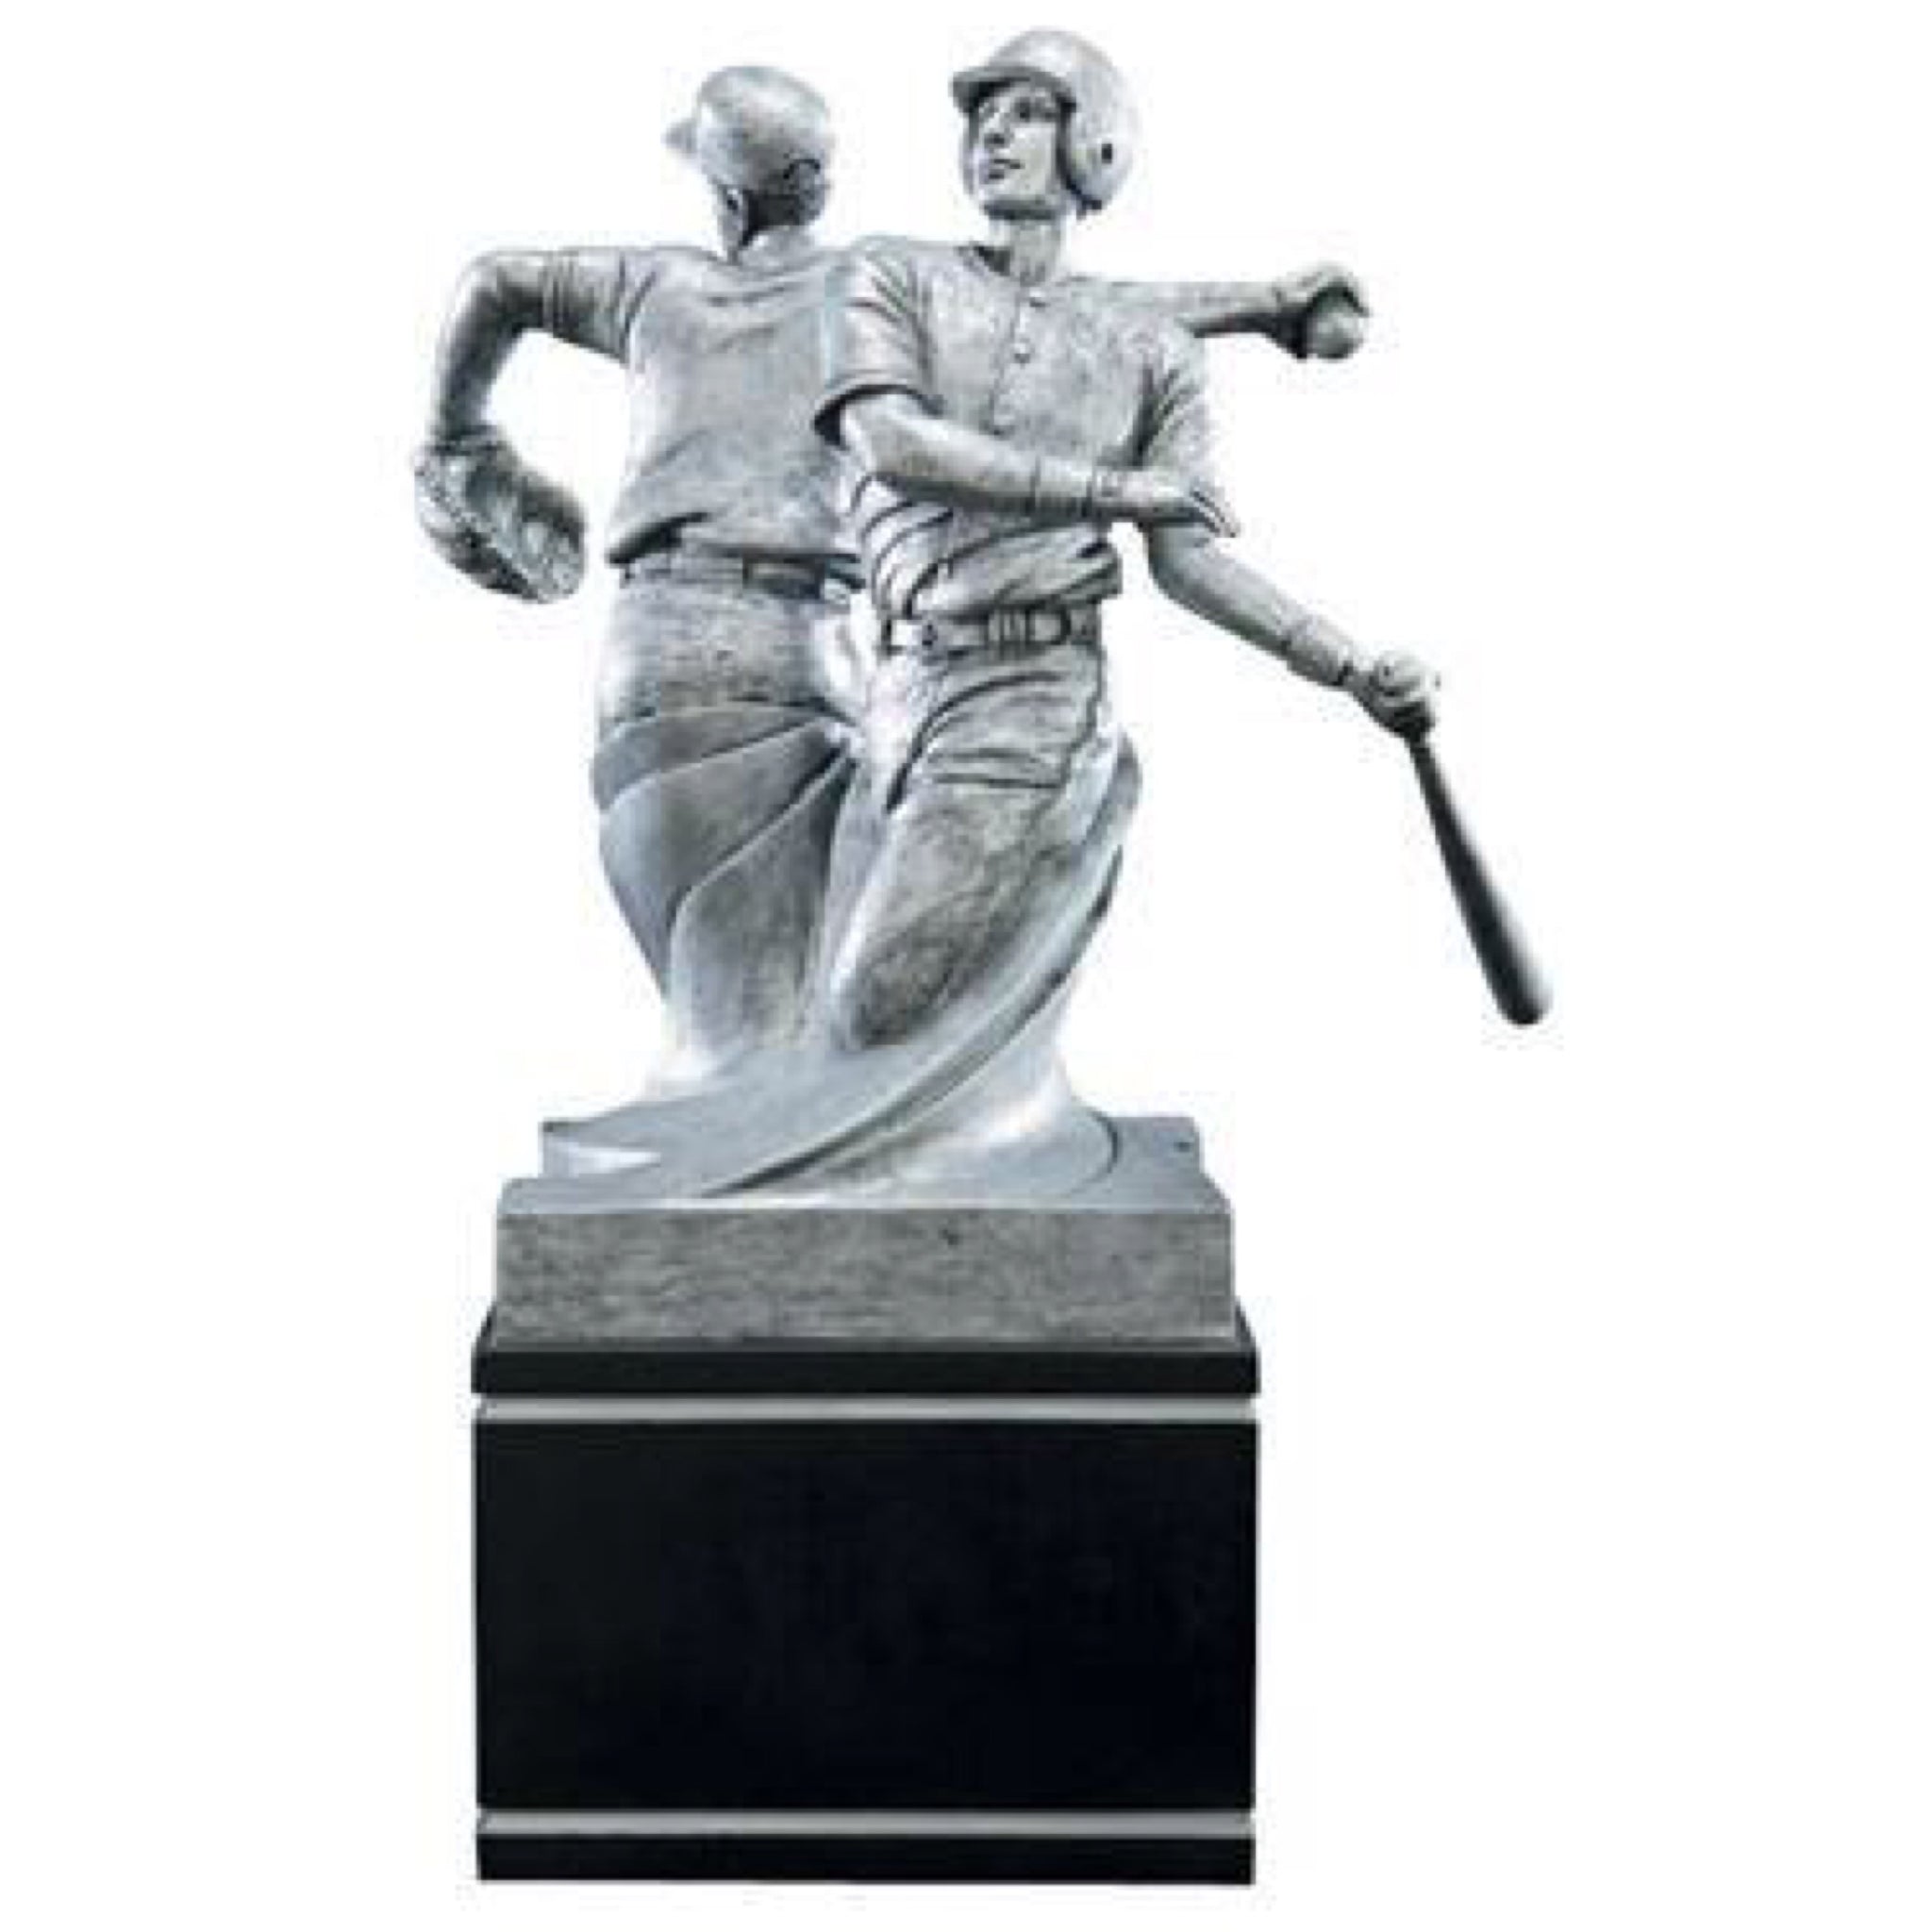 Large silver baseball trophy on a black square base featuring double sided baseball players with their backs to each other. One baseball player is throwing a ball, and the other side features a baseball player swinging his bat.